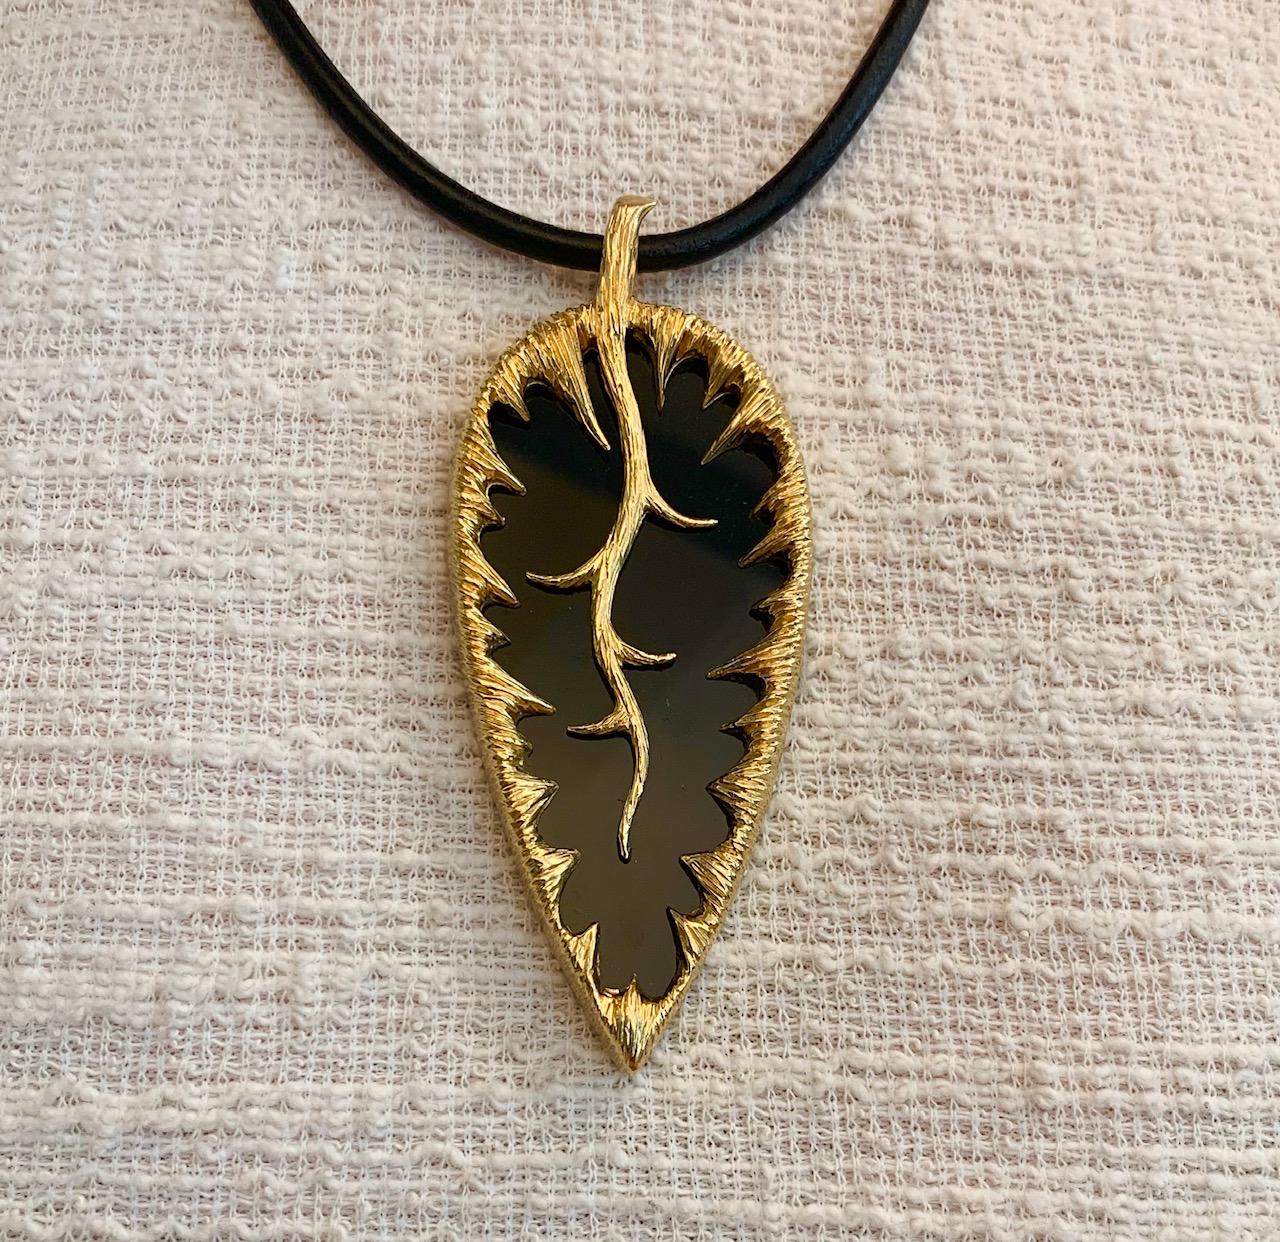 A large naturalist onyx and 18 karat textured gold leaf pendant, by the fashionable and fine jewelers, Kutchinsky, United Kingdom, 1973. 

The pendant is signed Kutchinsky. It is stamped with London hallmarks dated with letter 